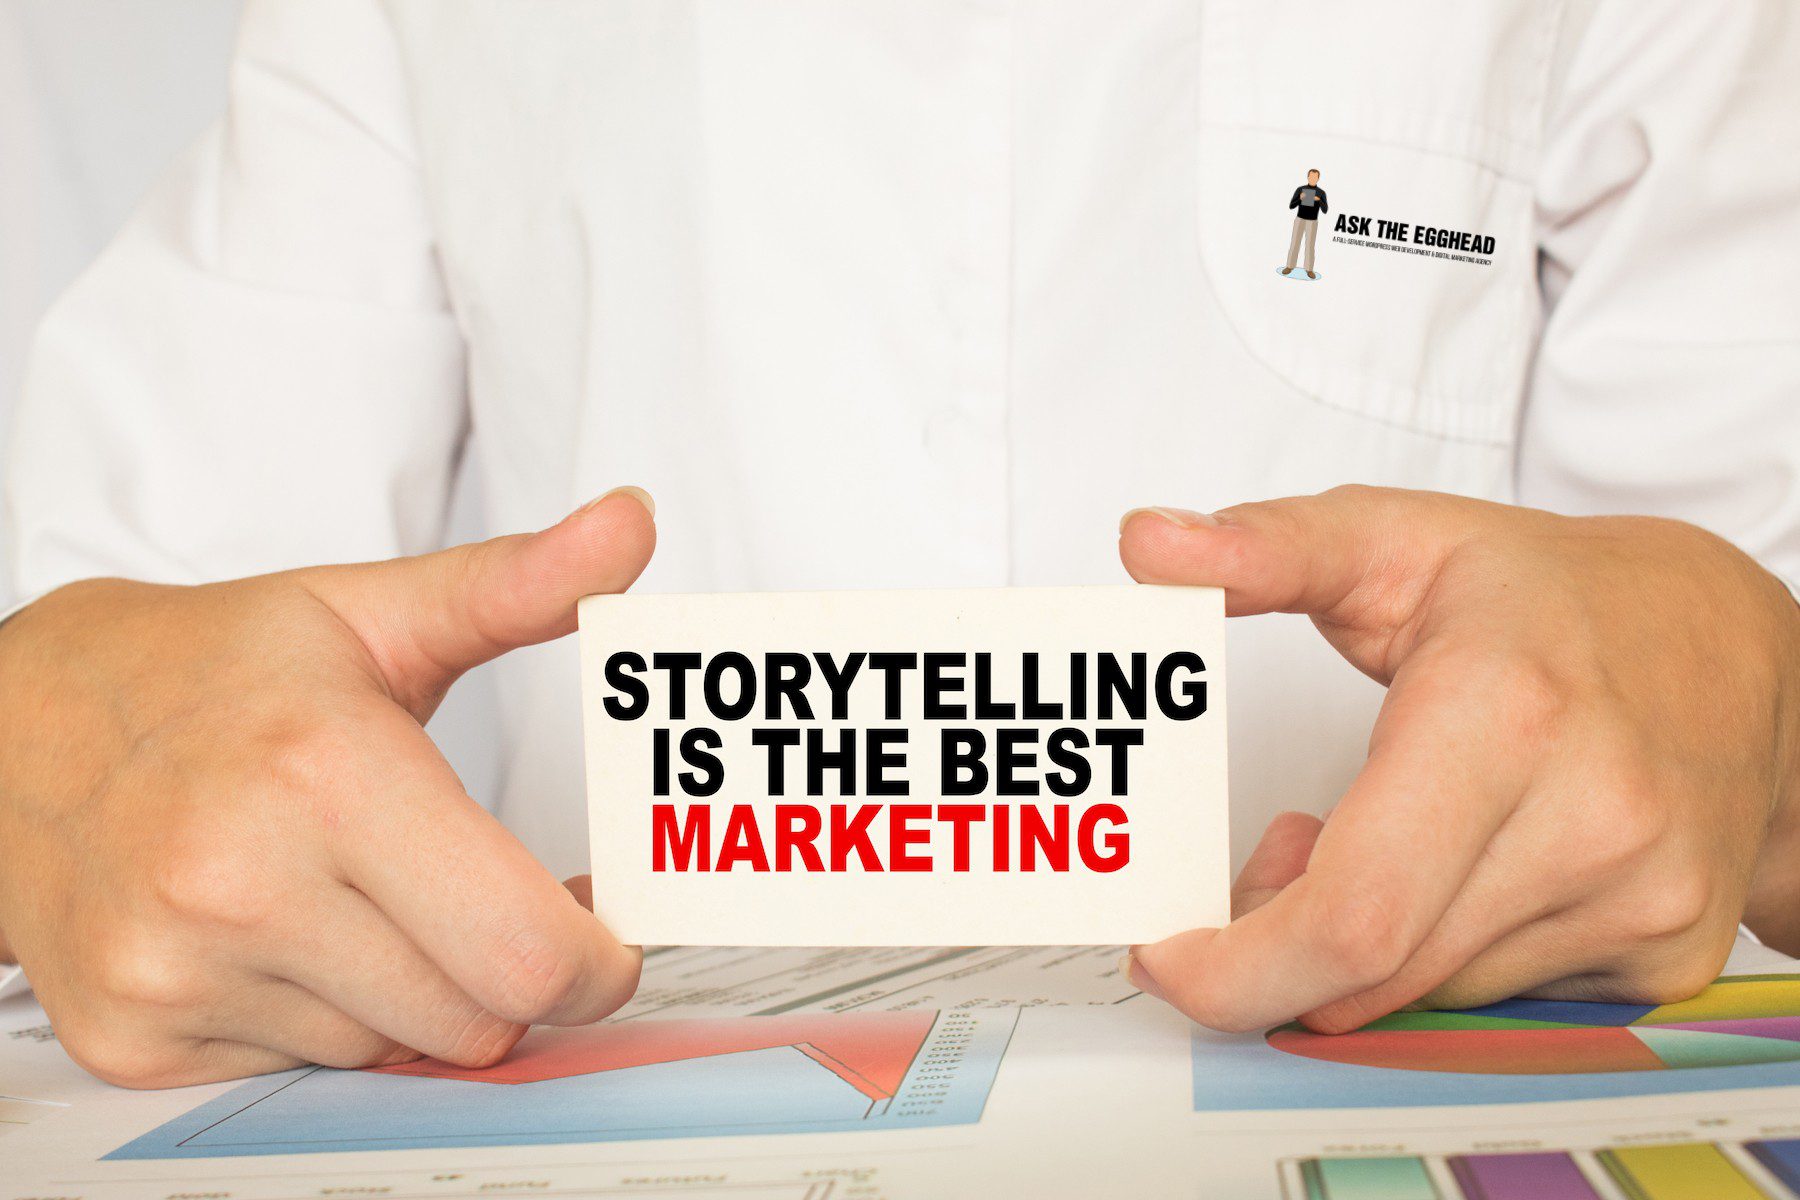 How Can Effective Brand Storytelling Be Applied to Content Creation?